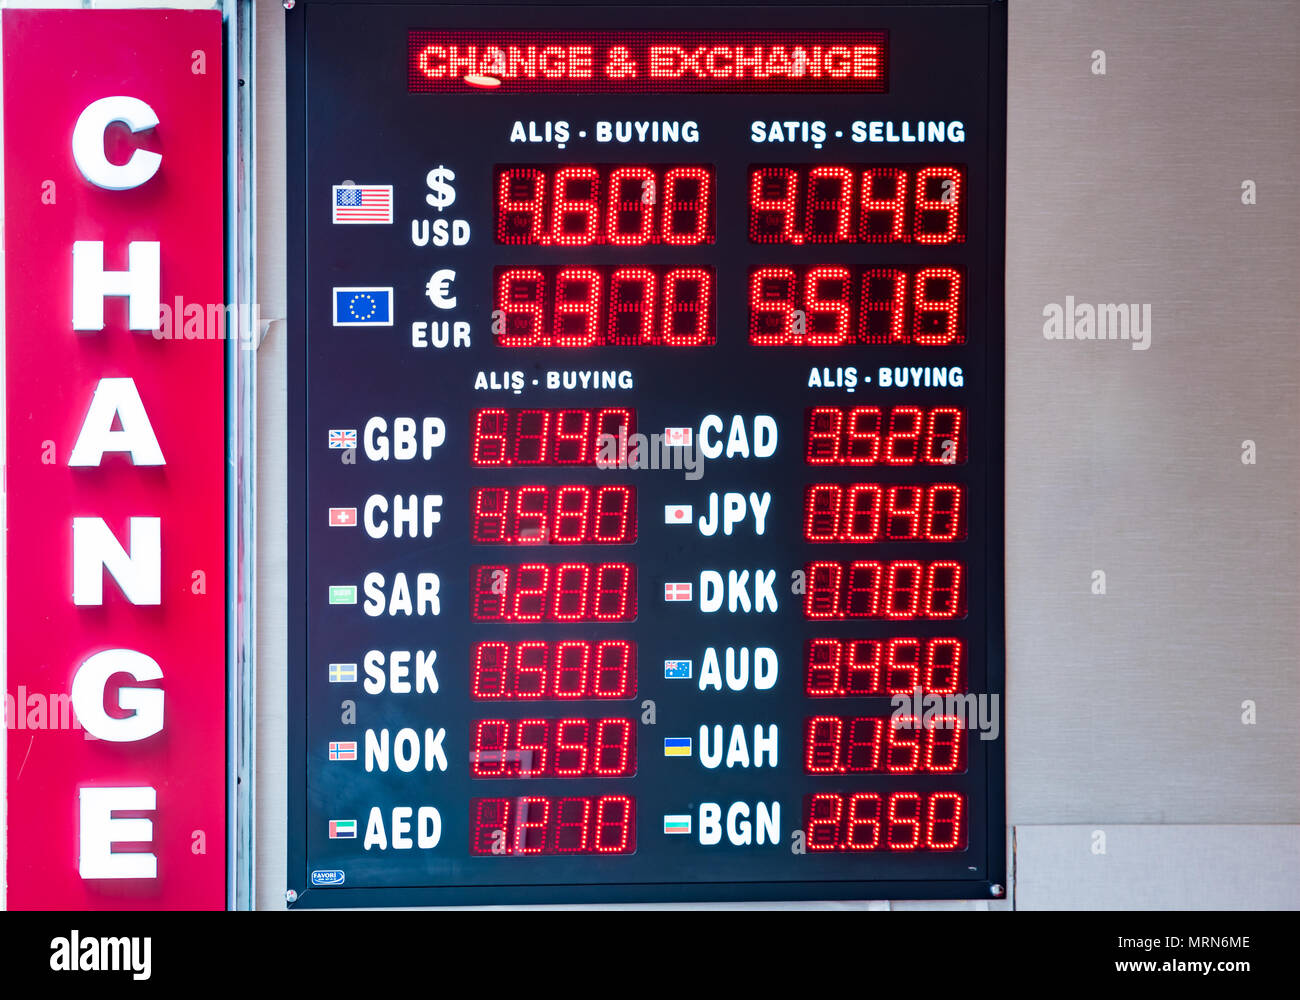 Turkish lira foreign exchange rates displays on a digital LED display board  in Istanbul, Turkey, Stock Photo